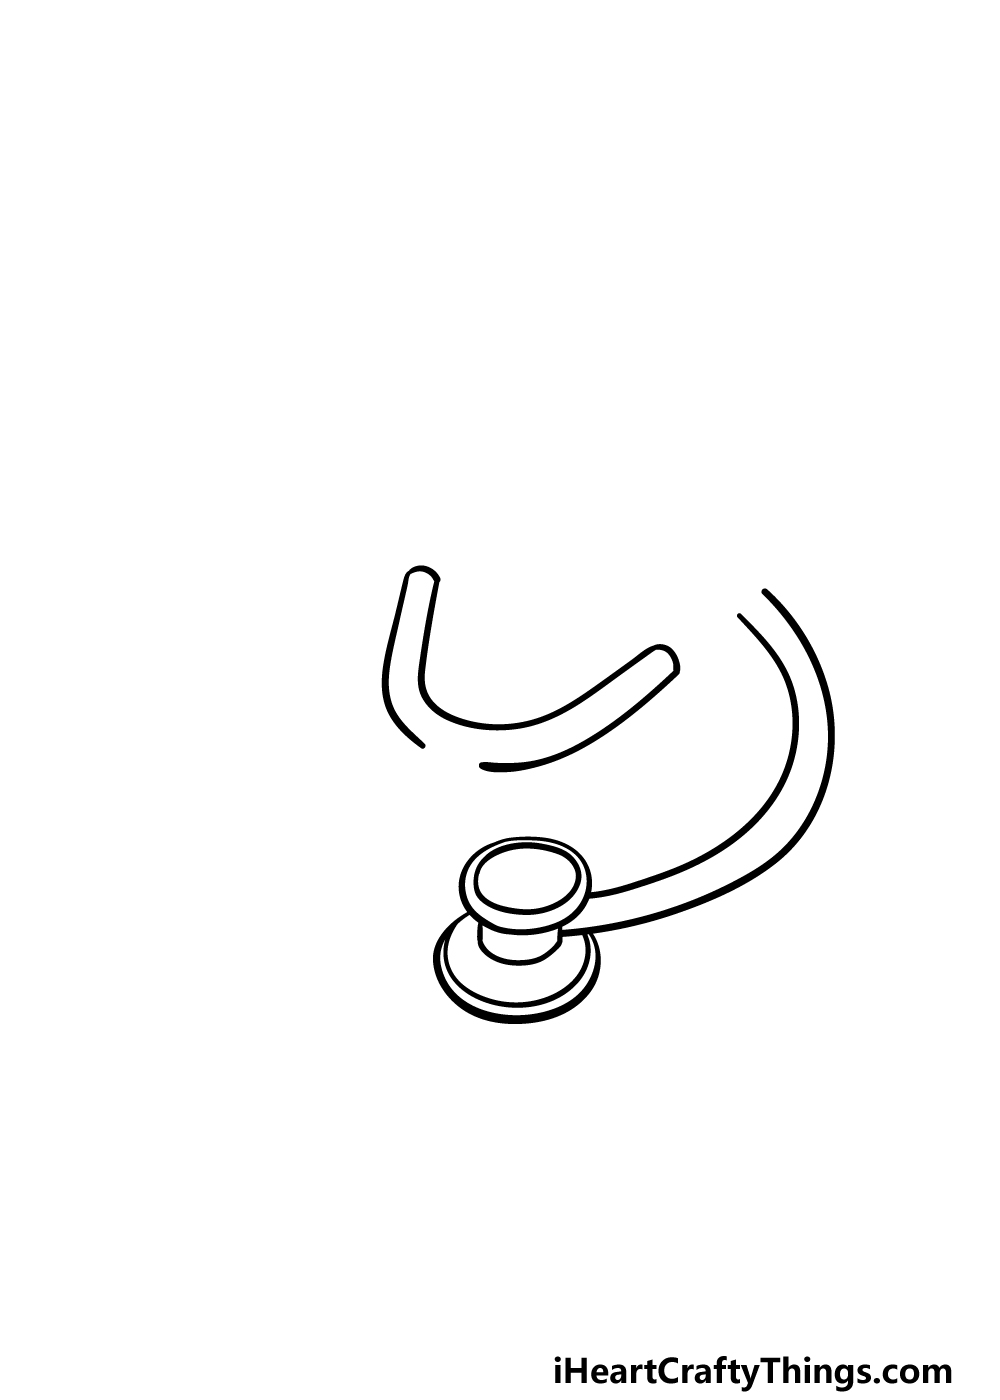 drawing stethoscope step 2